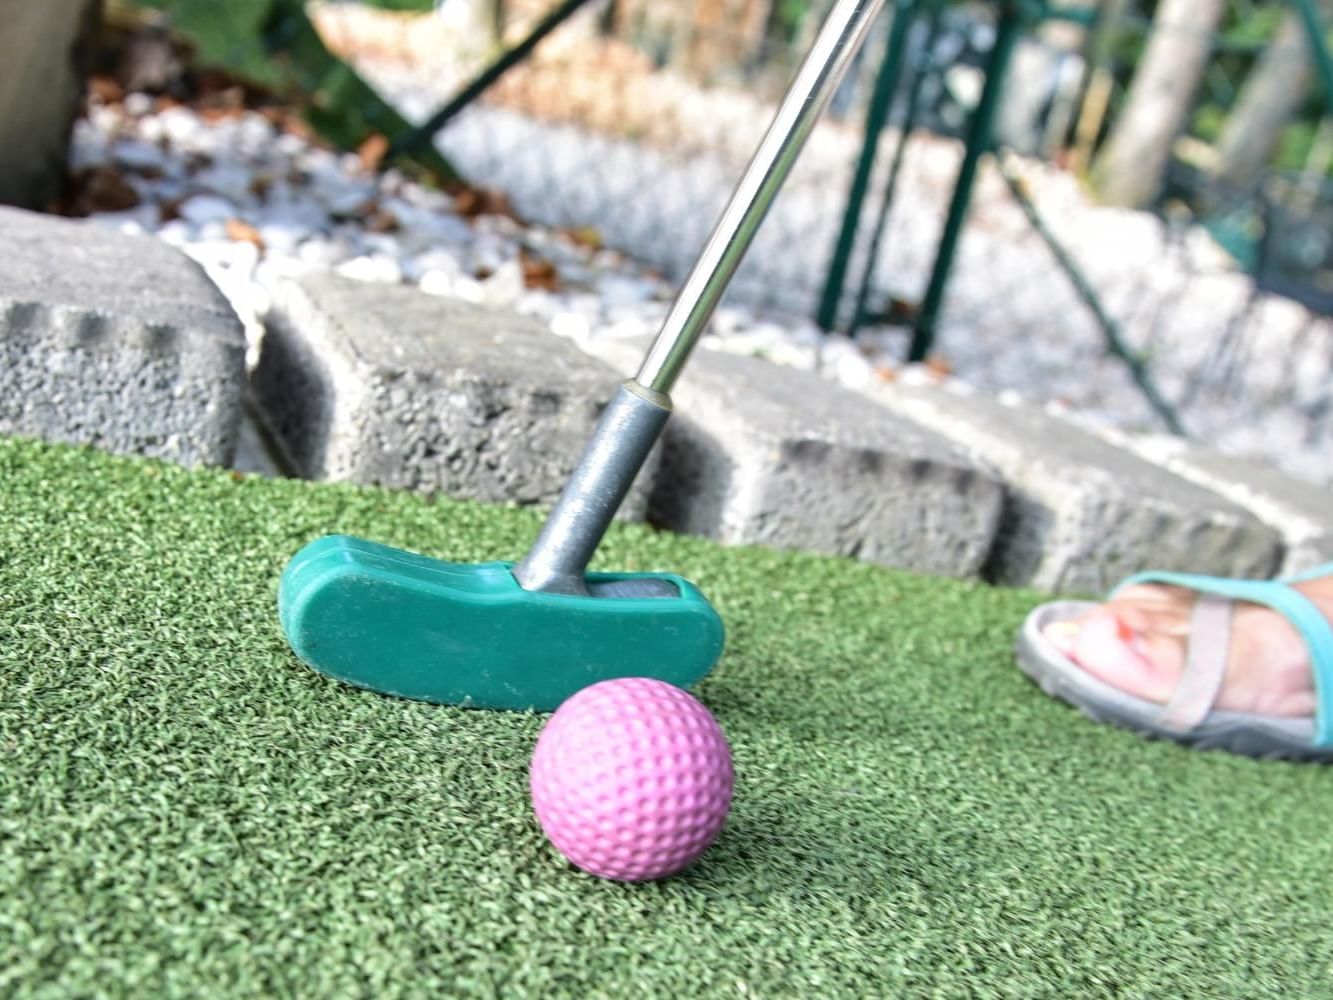 A person playing miniature golf with a pink ball at Wonder Mountain Fun Park near Anchorage by the Sea